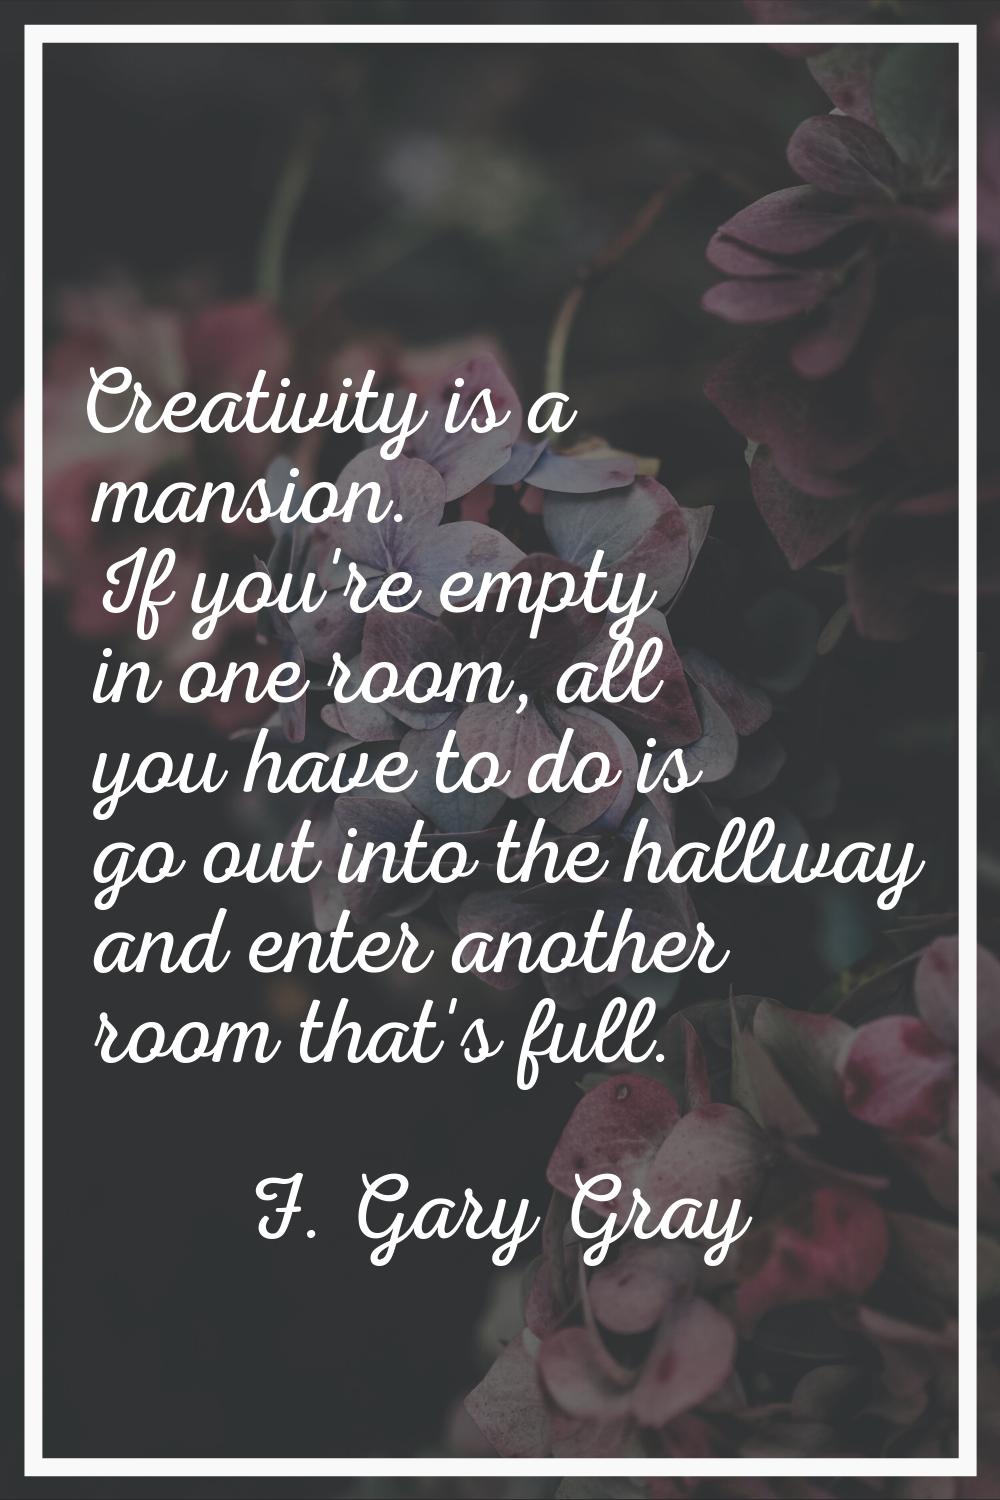 Creativity is a mansion. If you're empty in one room, all you have to do is go out into the hallway